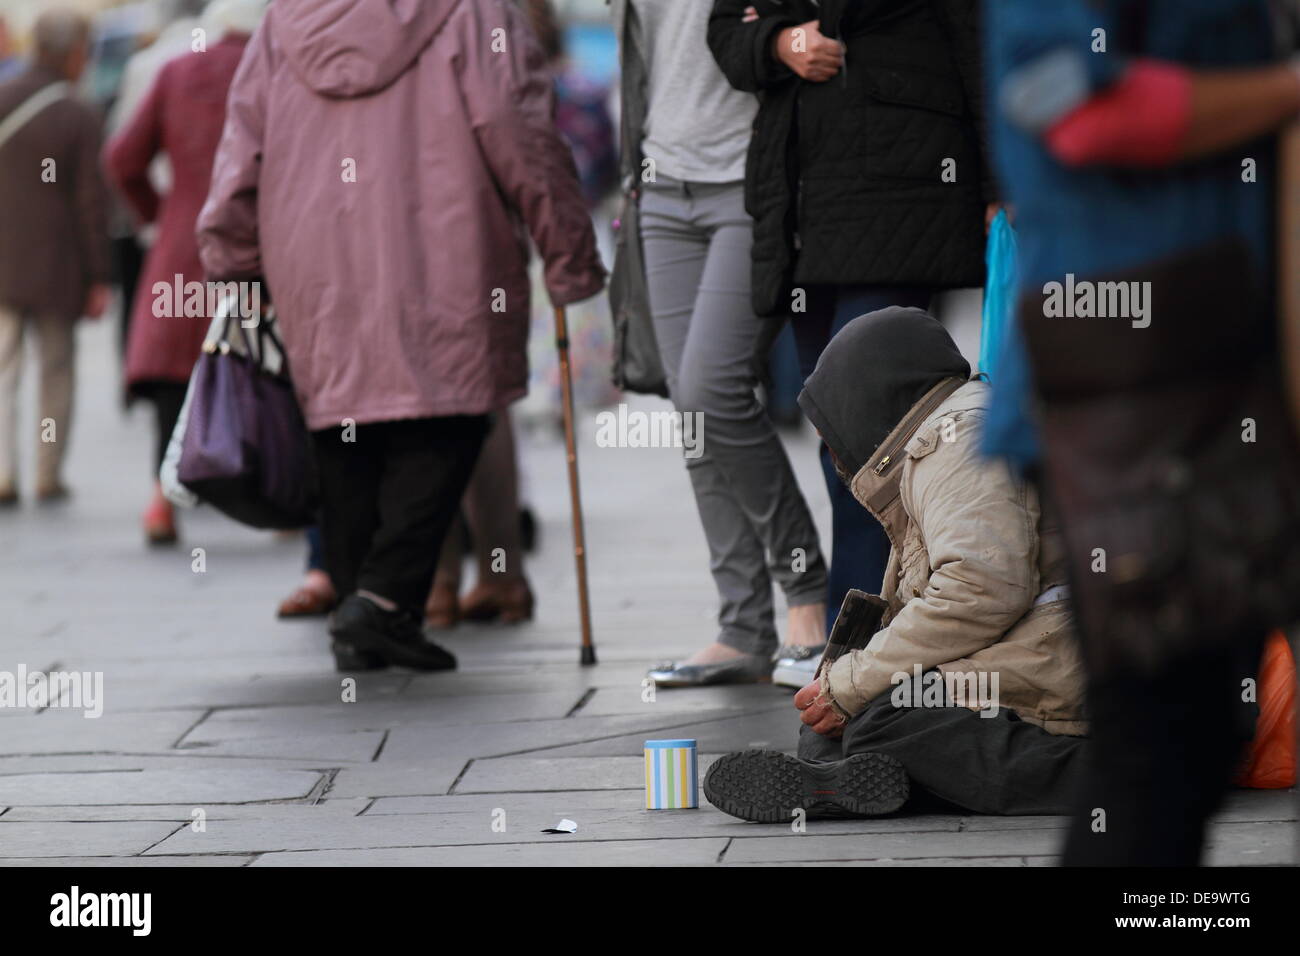 A man begs for change in the street, poverty, social issues, poor, homeless, Argyll Street, Glasgow, Scotland, UK Stock Photo